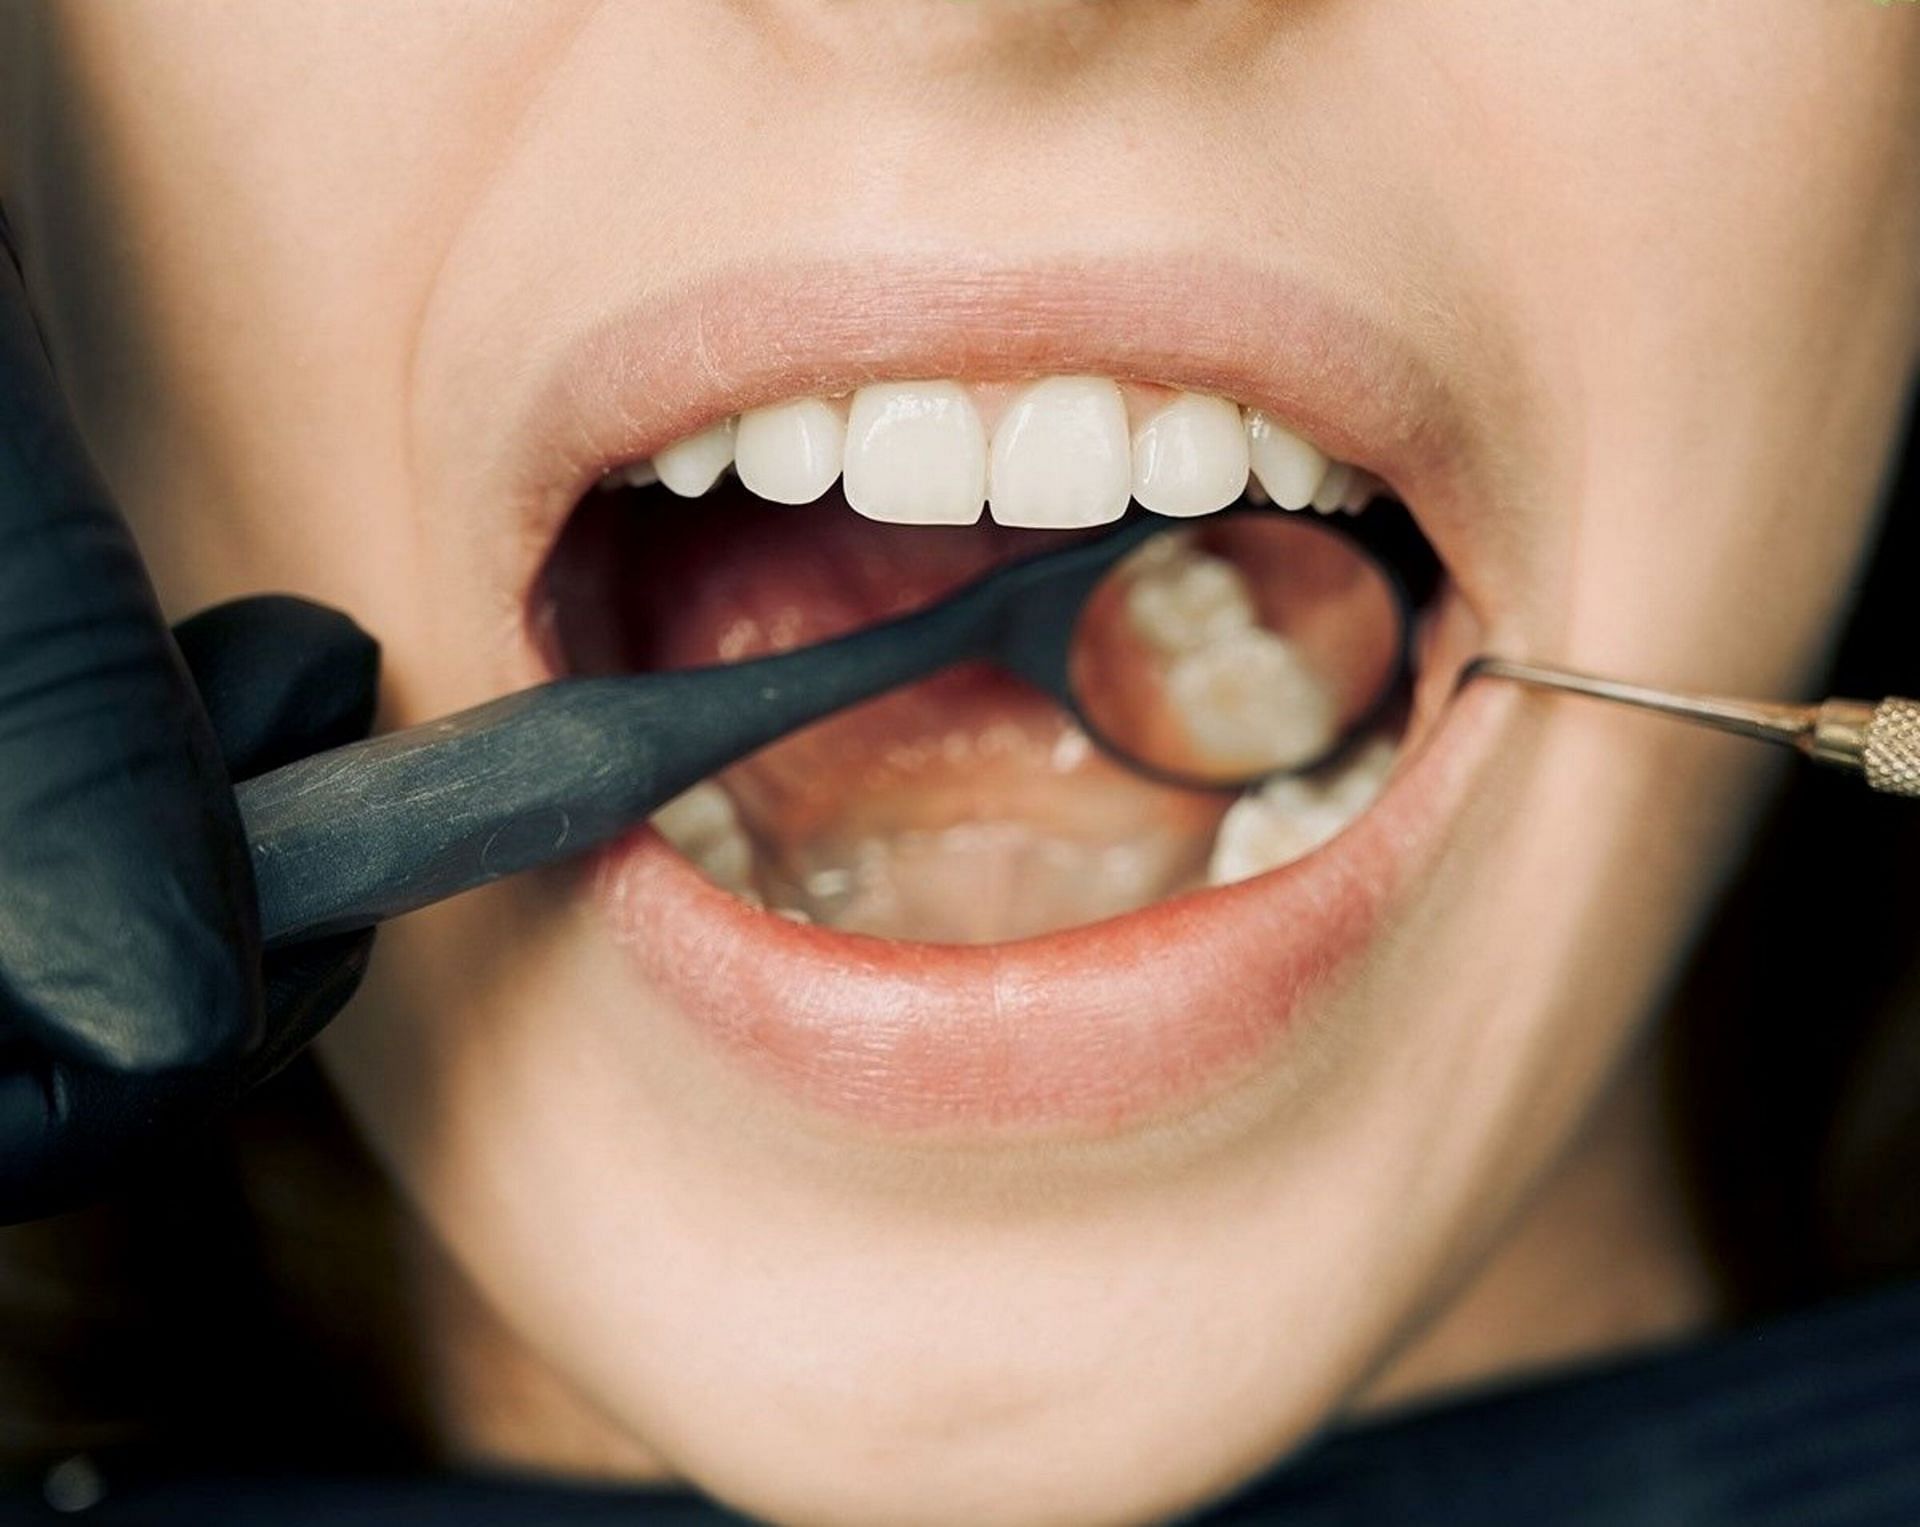 Importance of oral hygiene (image sourced via Pexels / Photo by arvind)